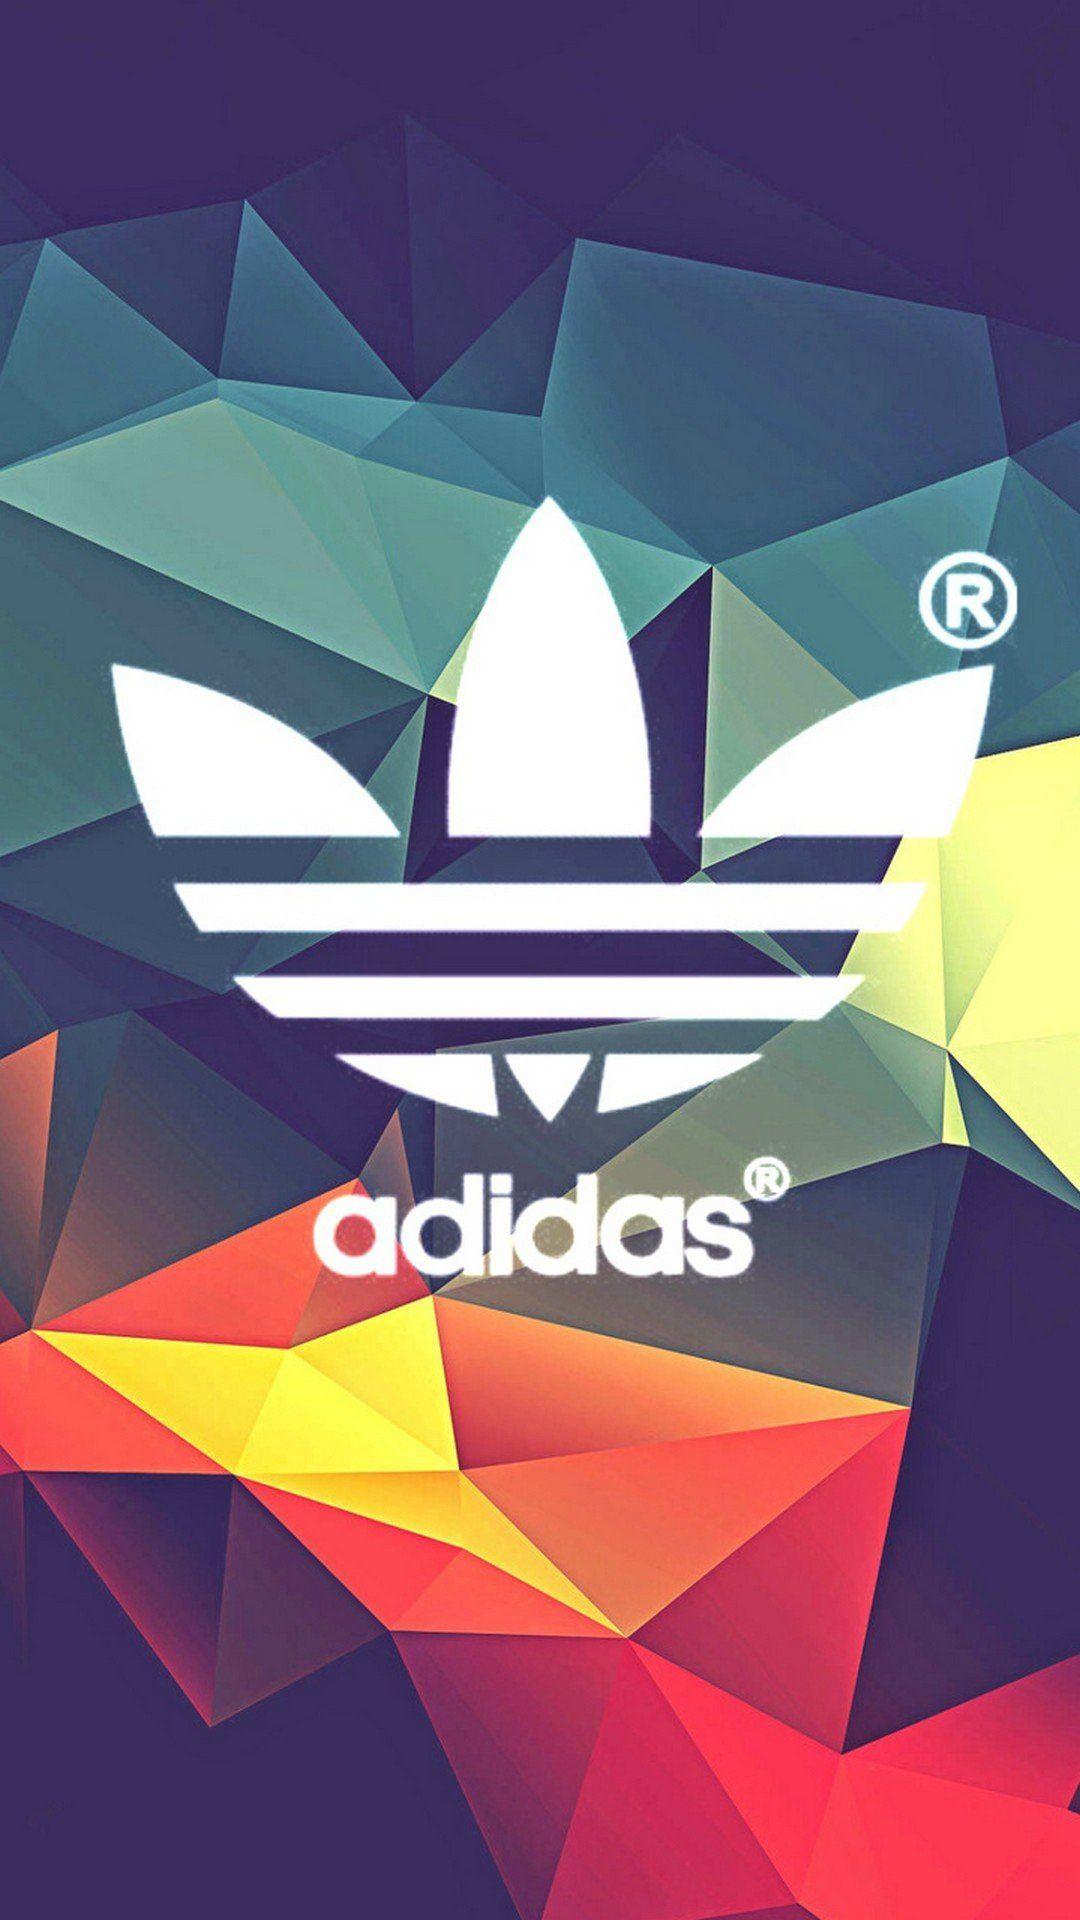 adidas wallpaper for android